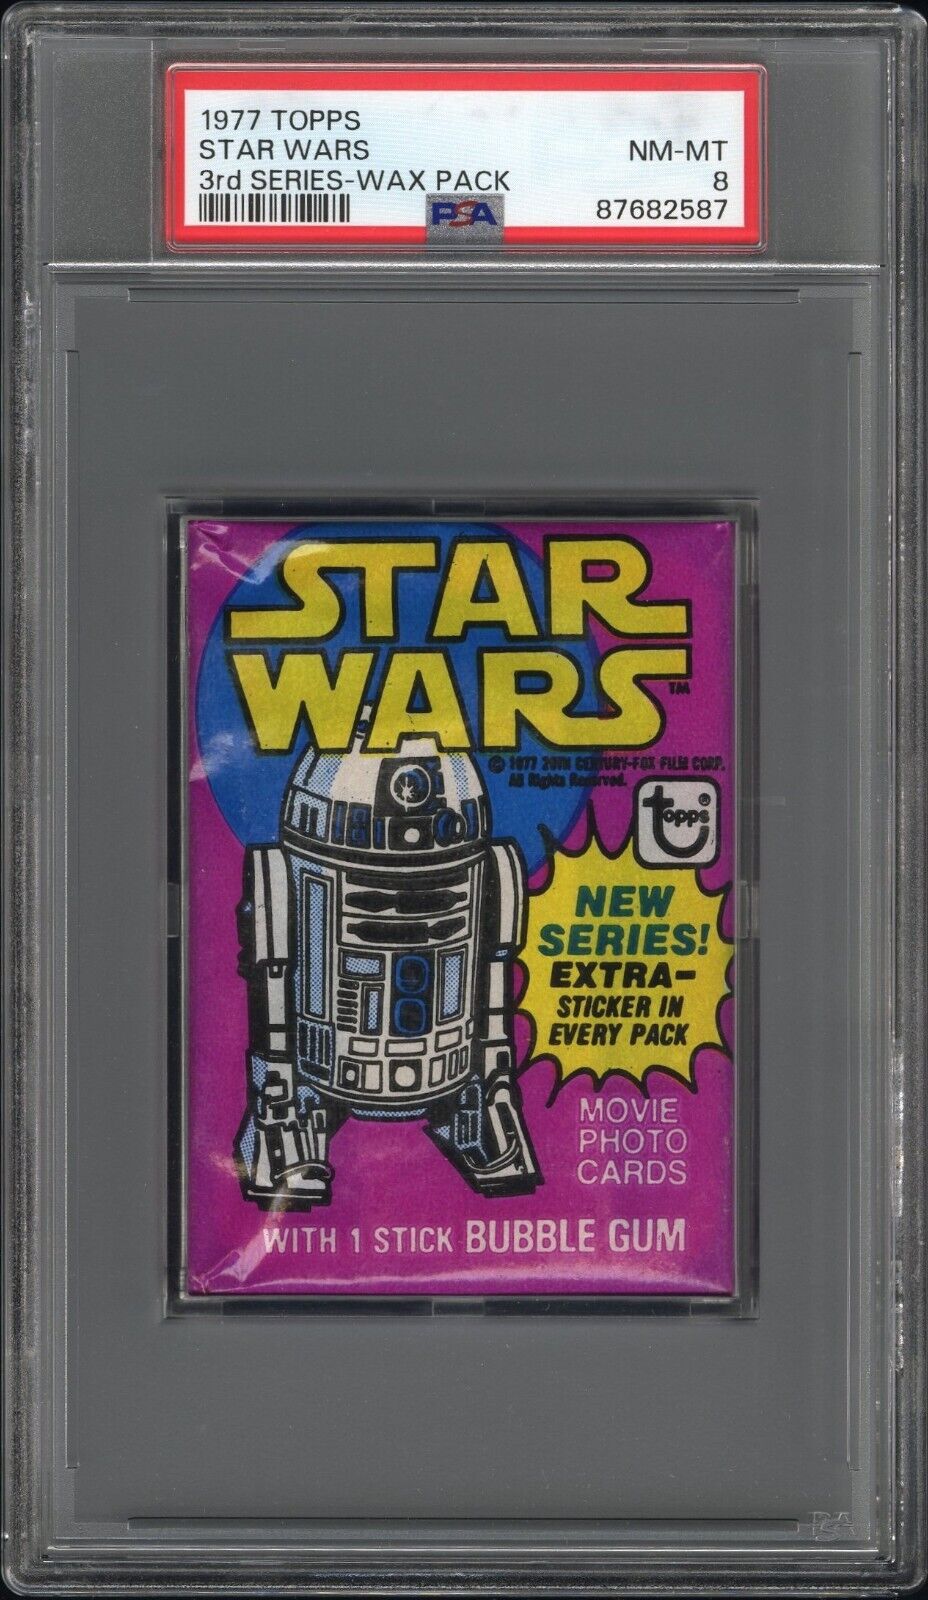 1977 Topps Star Wars 3rd Series Sealed Unopened Wax Pack PSA 8 NM/MT